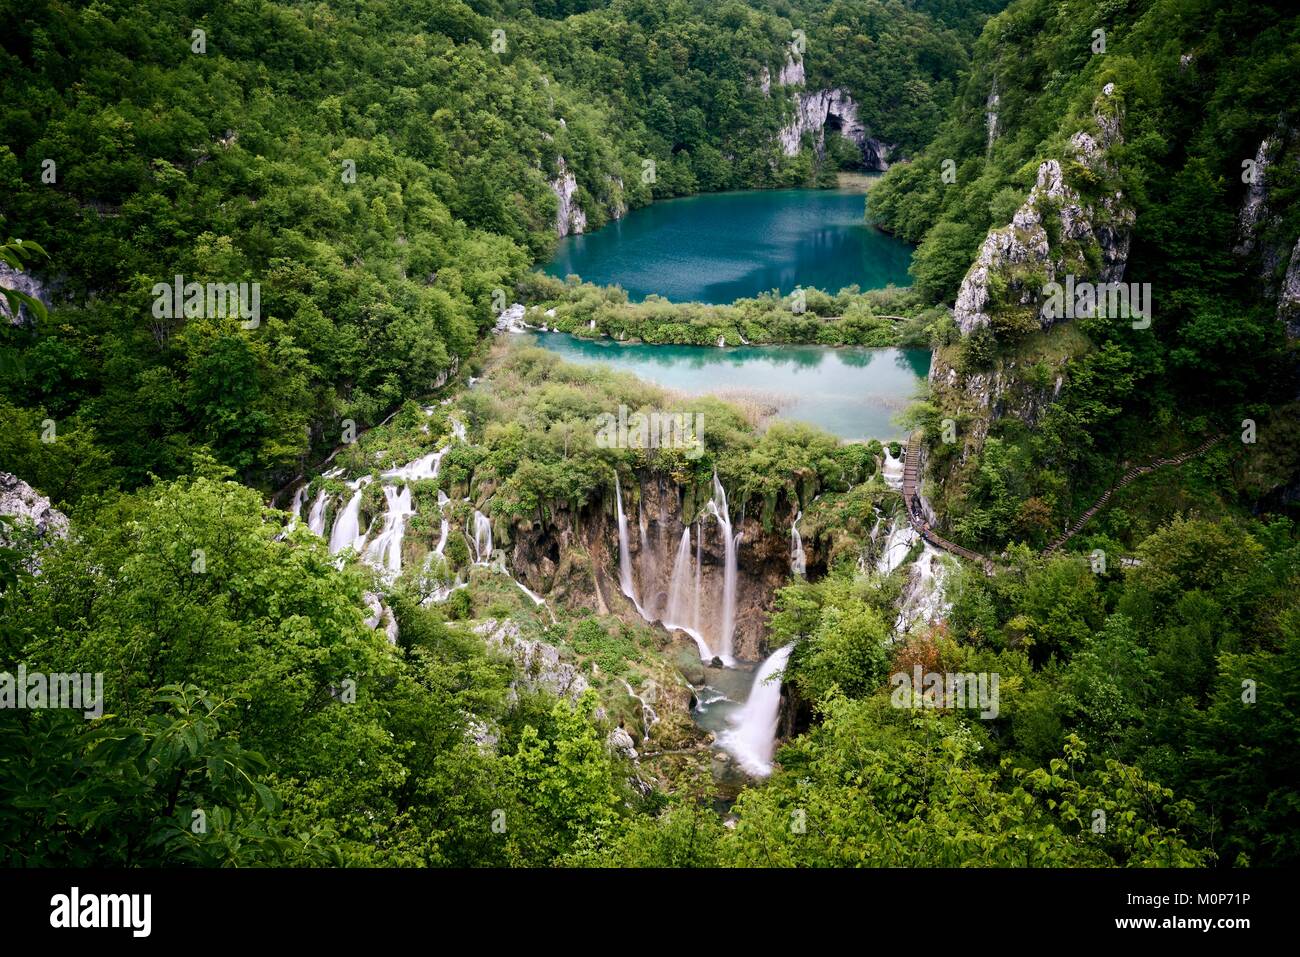 Croatia,Plitvice lakes National Park,listed as World Heritage by UNESCO,lower lakes Stock Photo